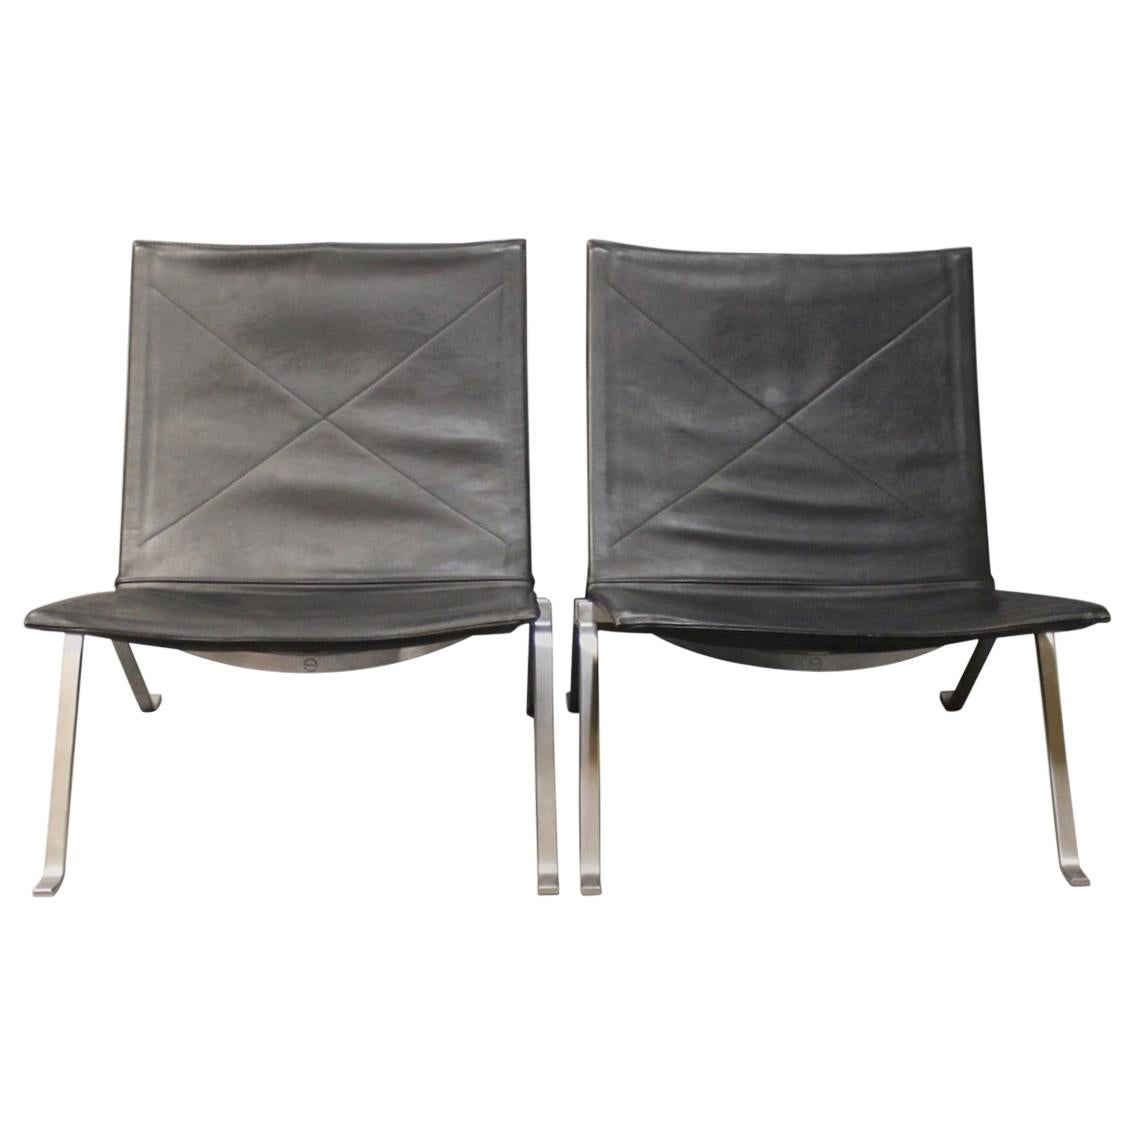 Pair of PK22 Chairs by Poul Kjærholm and Fritz Hansen, 1989